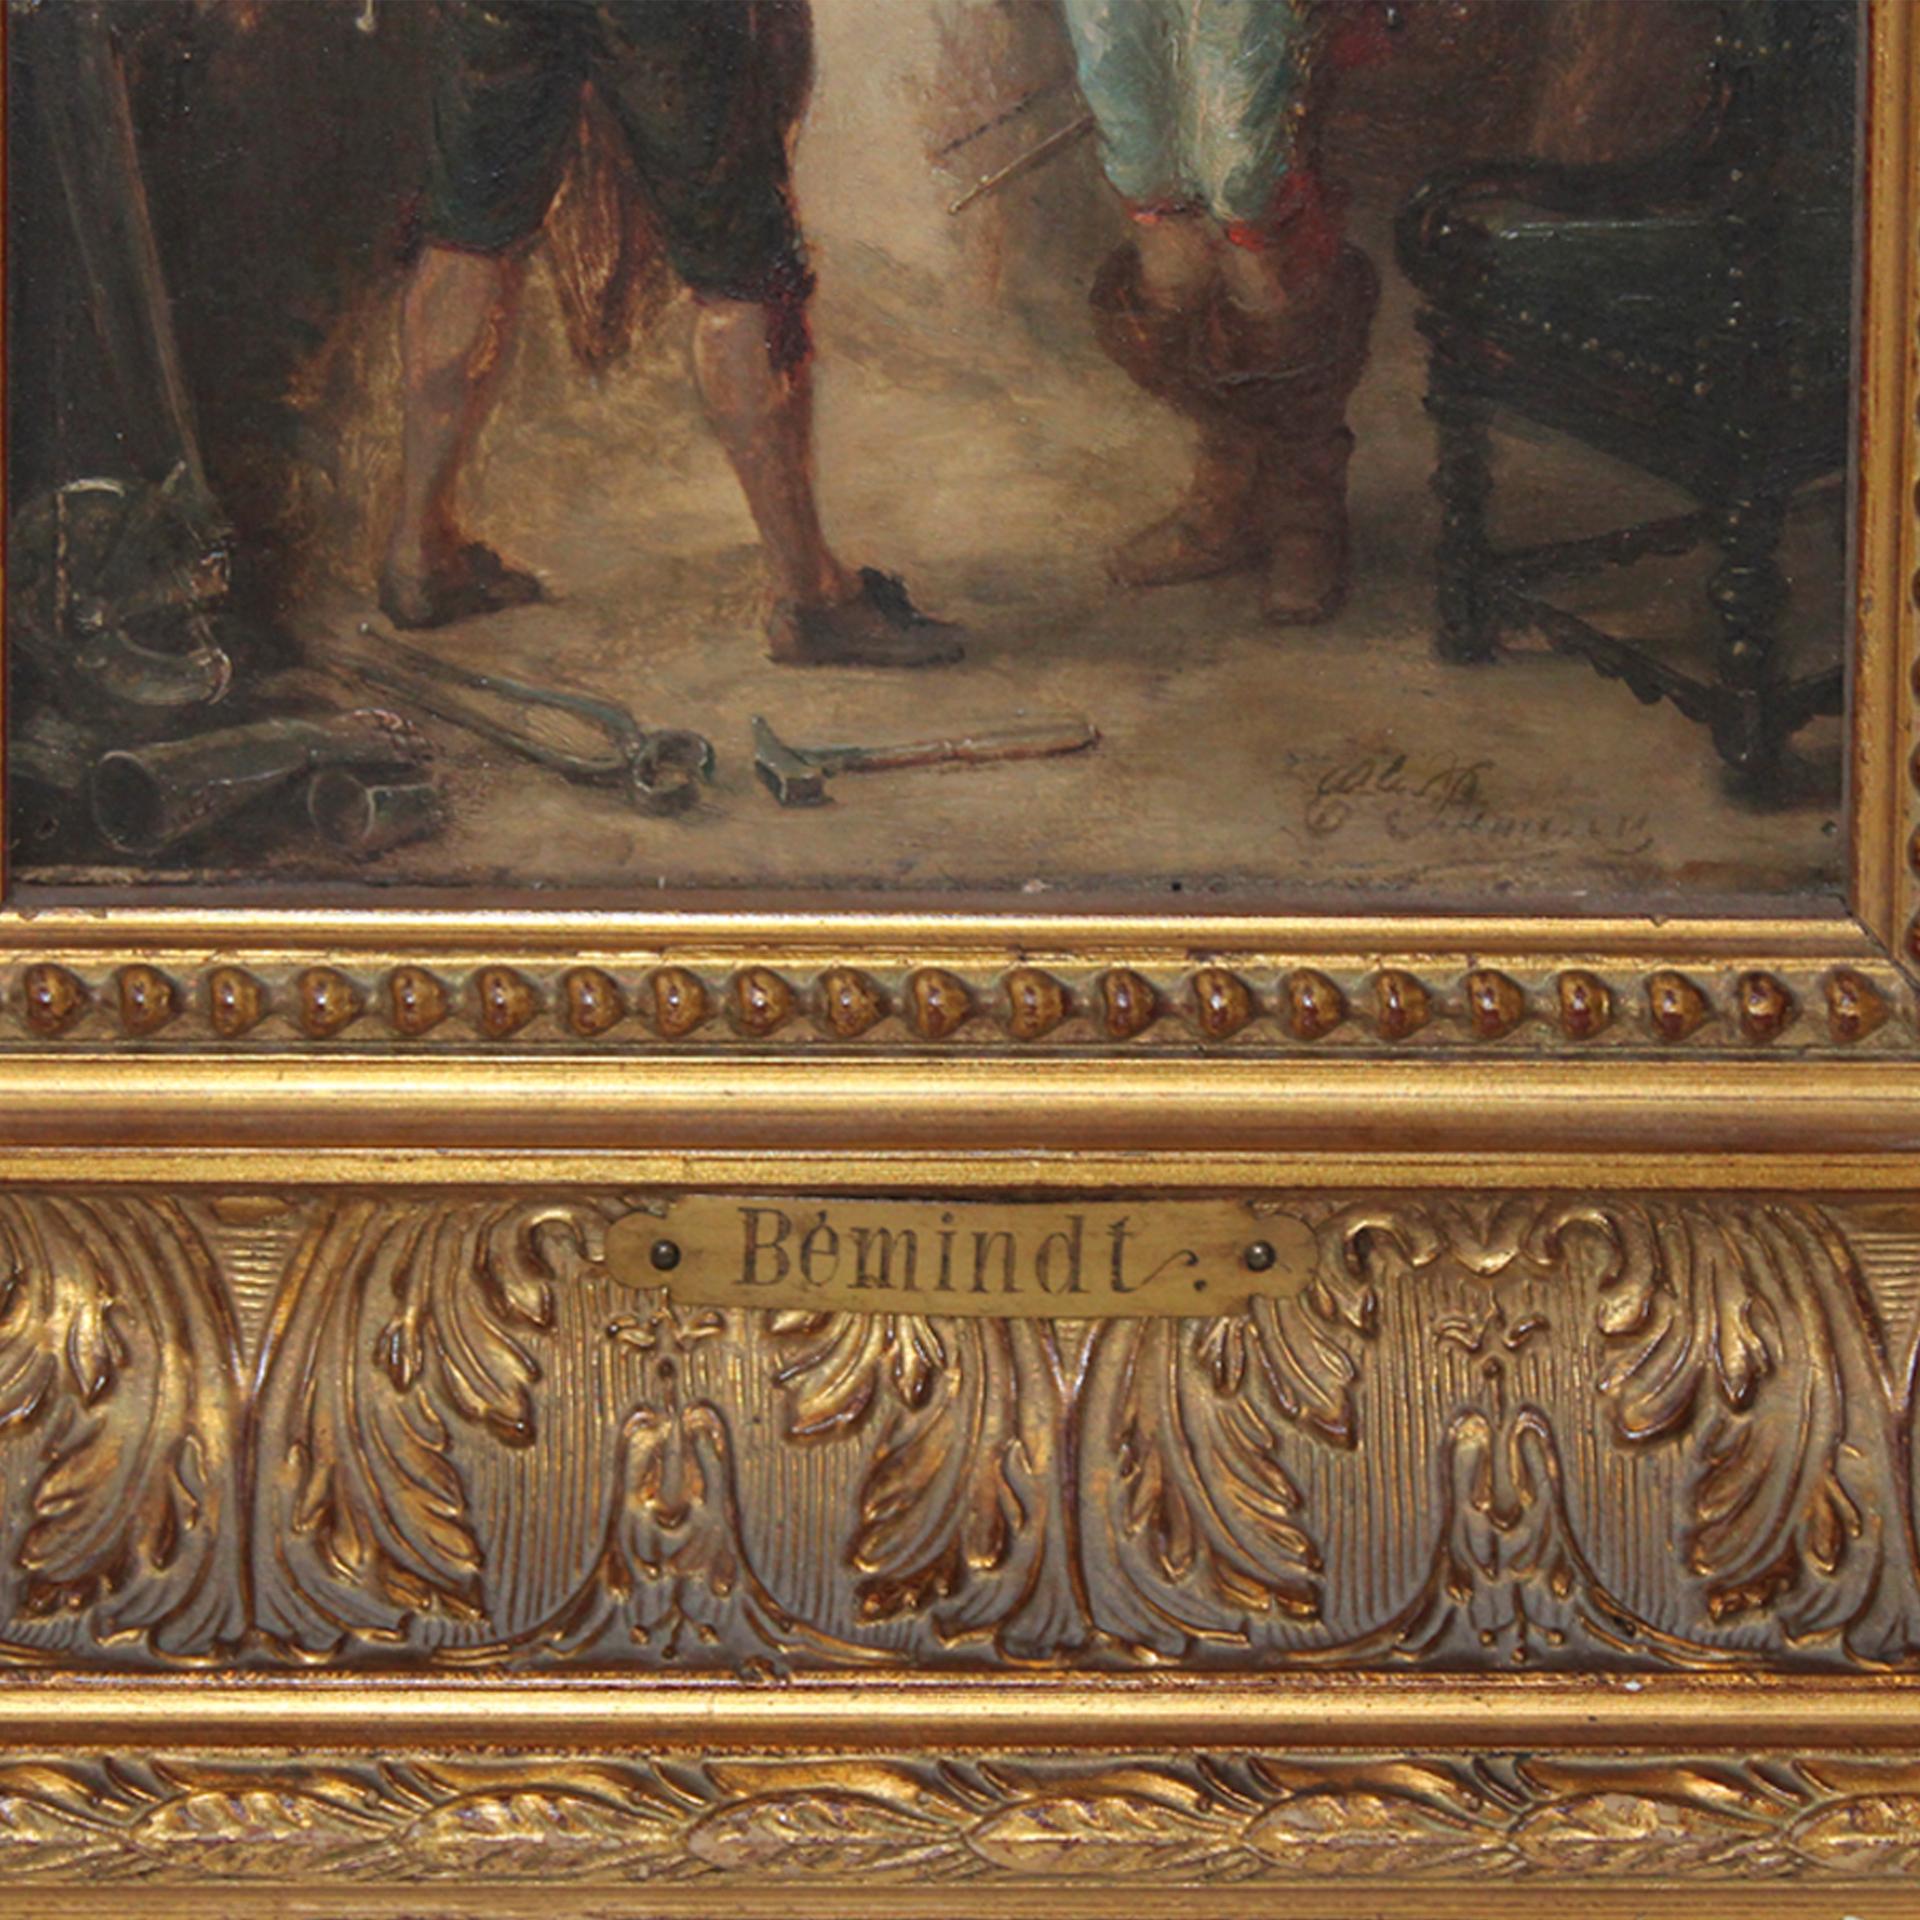 Late 19th Century Oil on Canvas Diptych Painted by Émile Bemindt For Sale 4